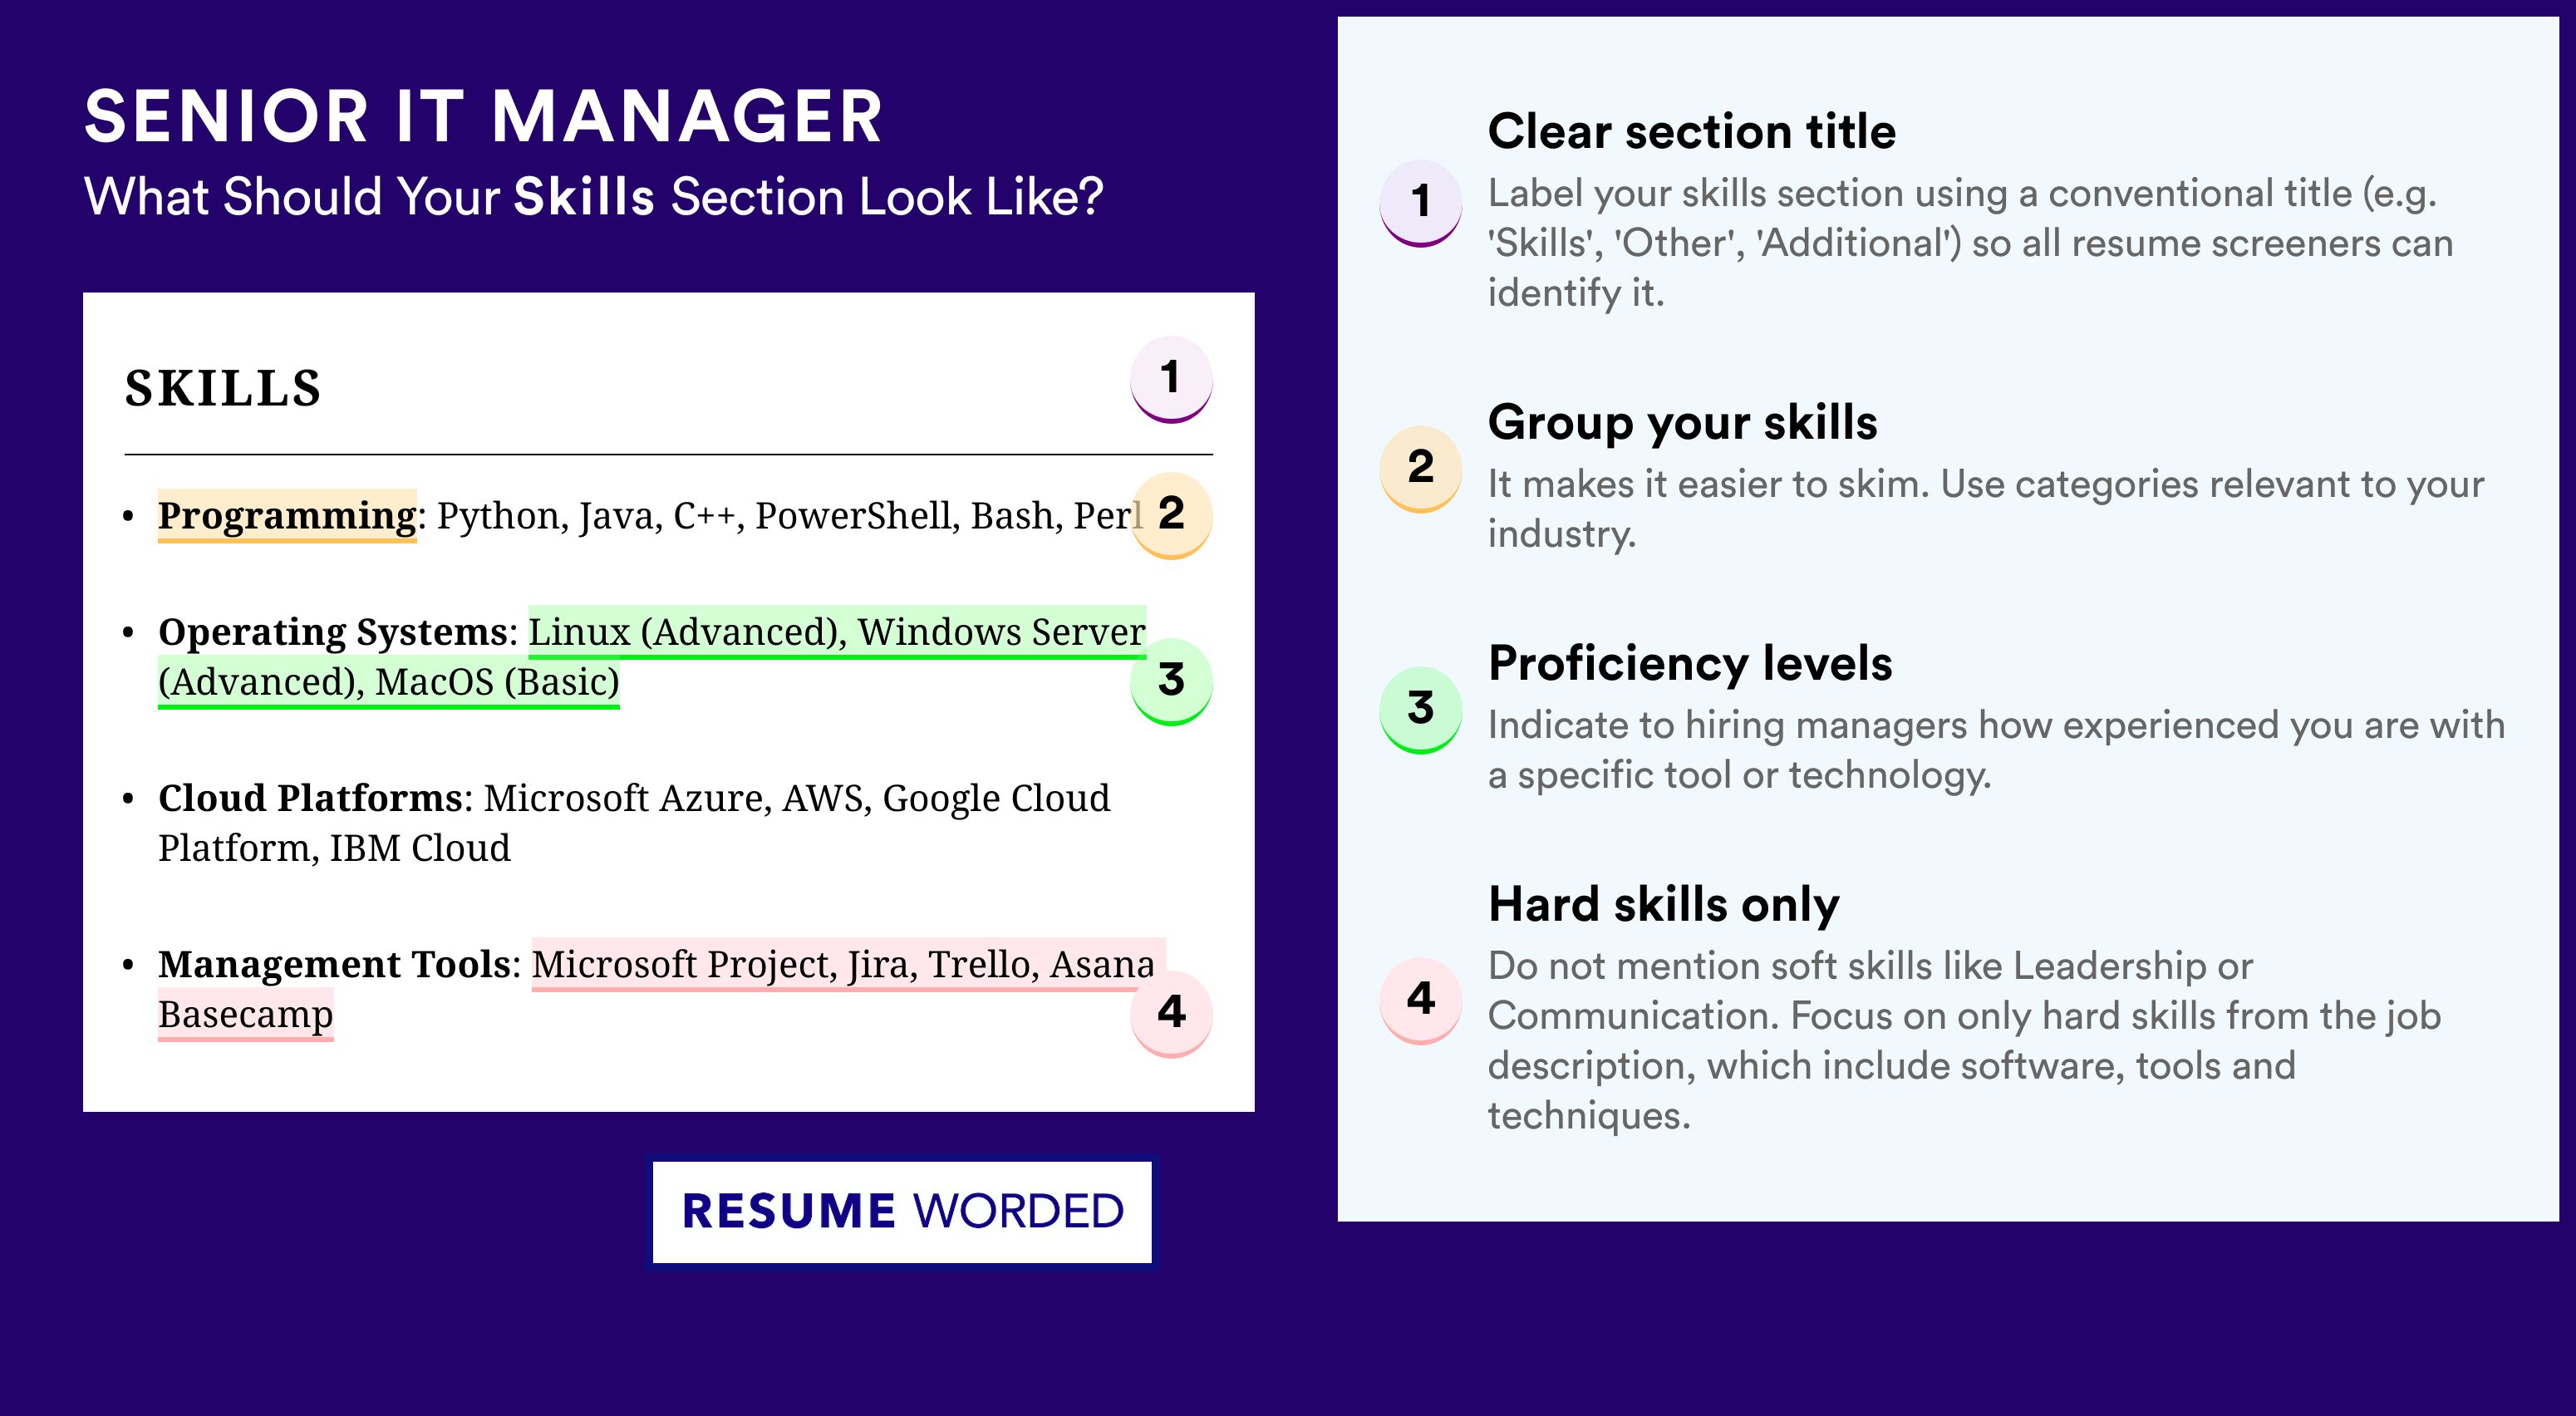 How To Write Your Skills Section - Senior IT Manager Roles